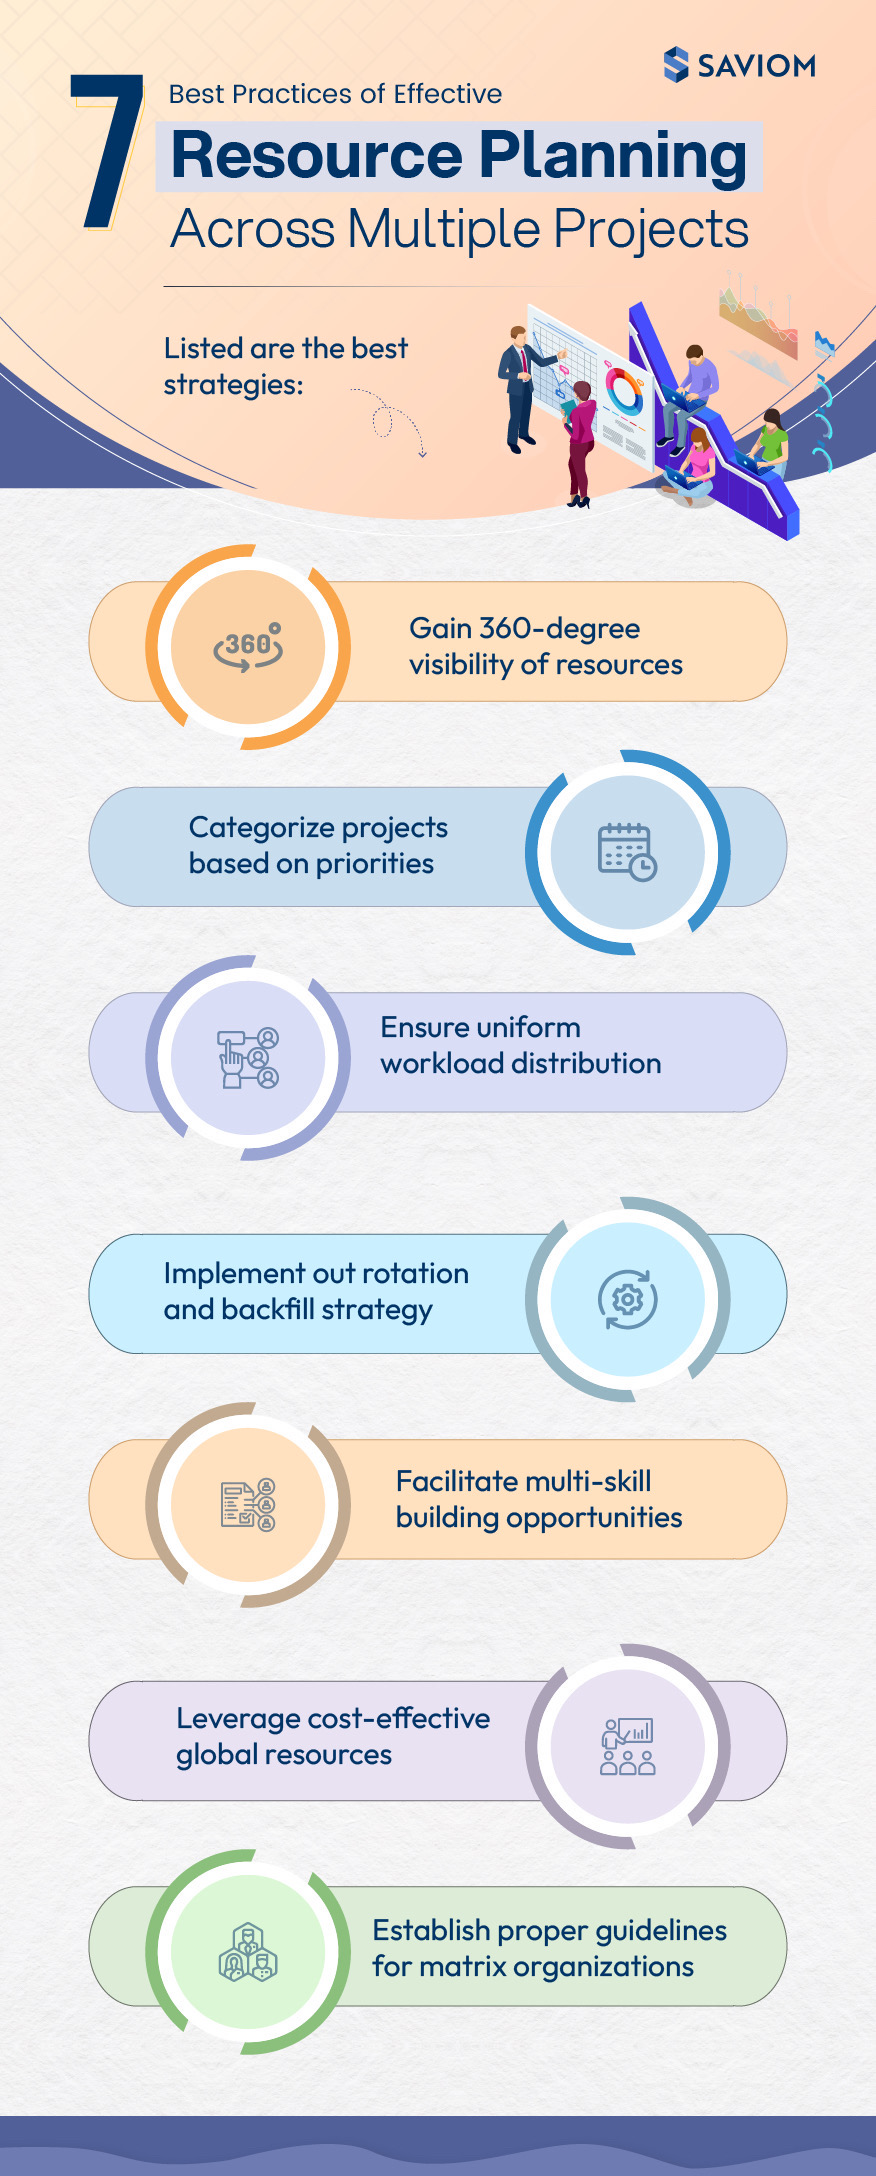 7 Best Practices of Effective Resource Planning Across Multiple Projects